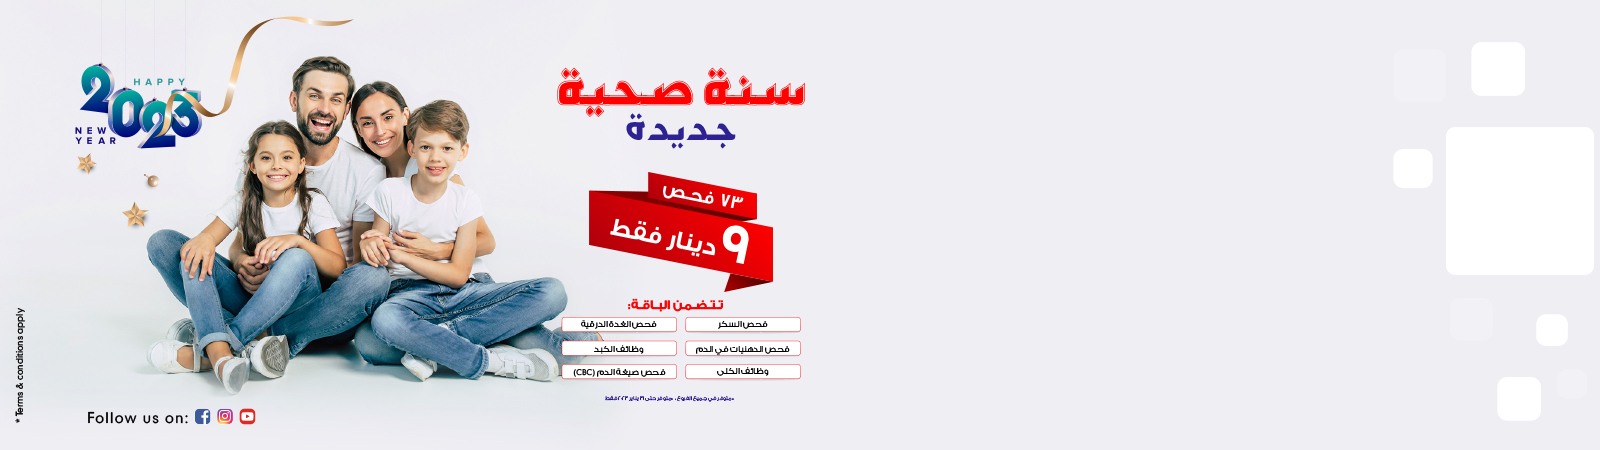 ALH-Website-Banner-New-Year-Package-1600-x-450-Arabic